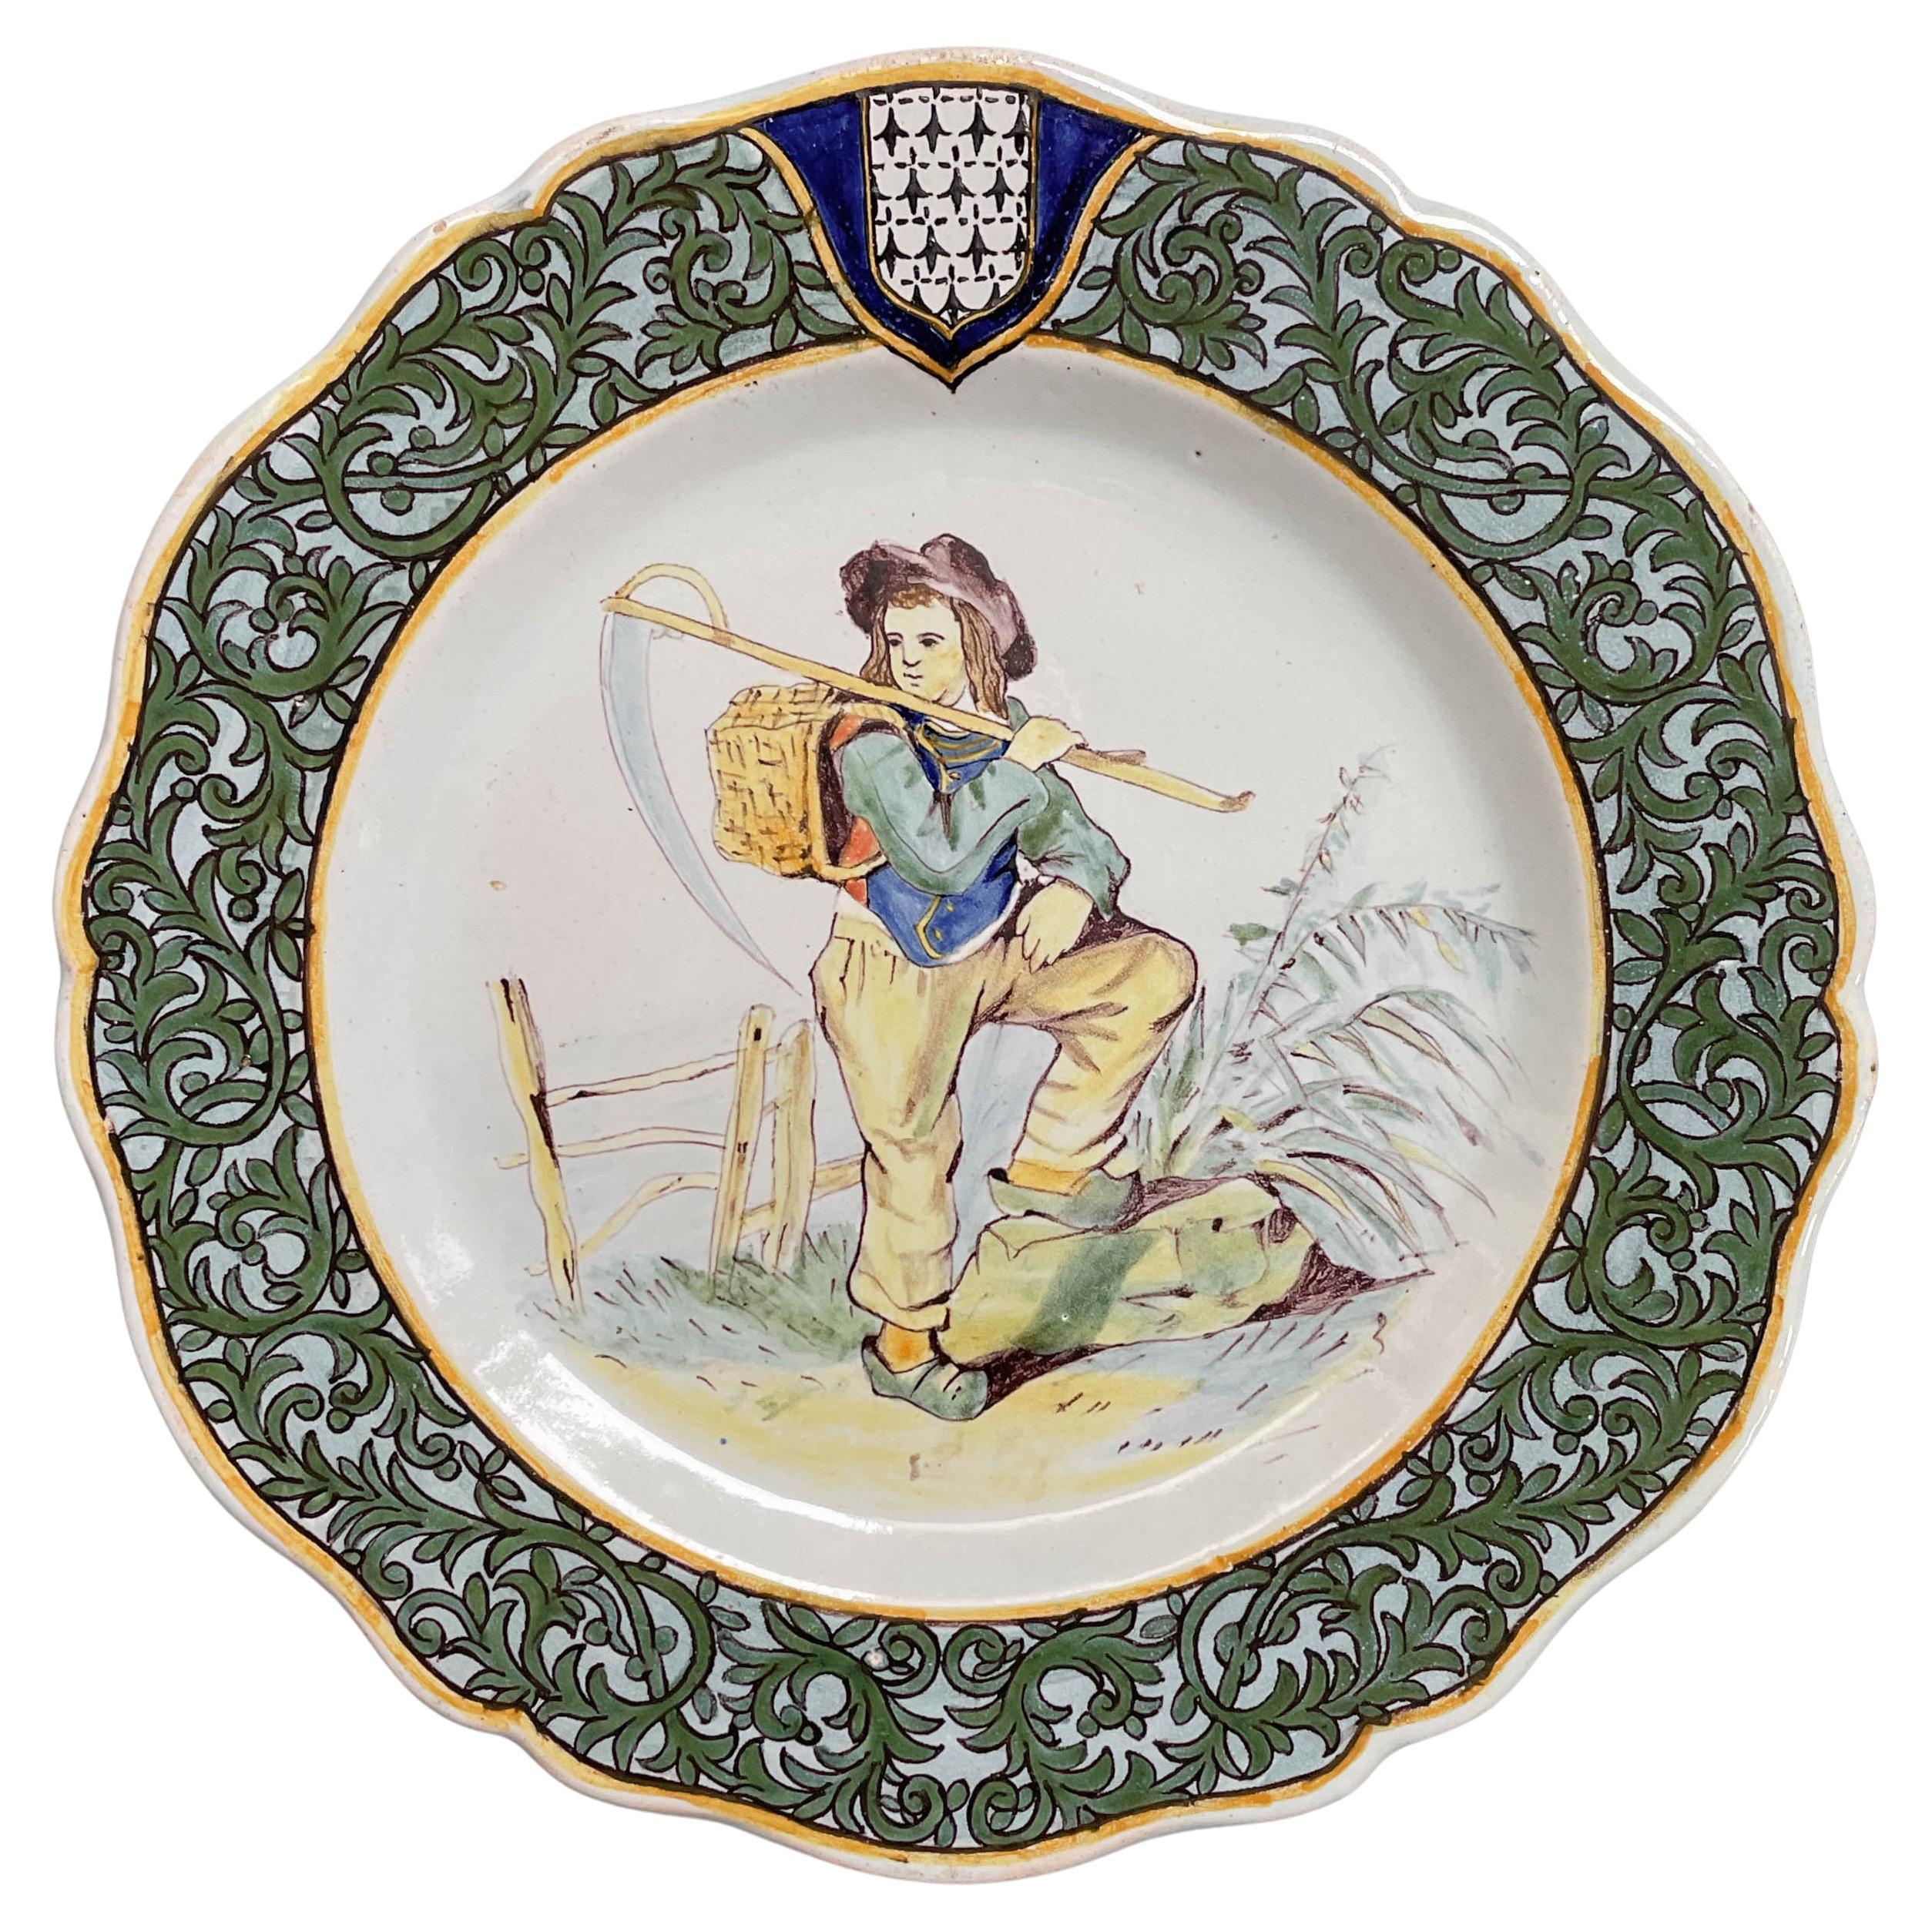 What is French faience?